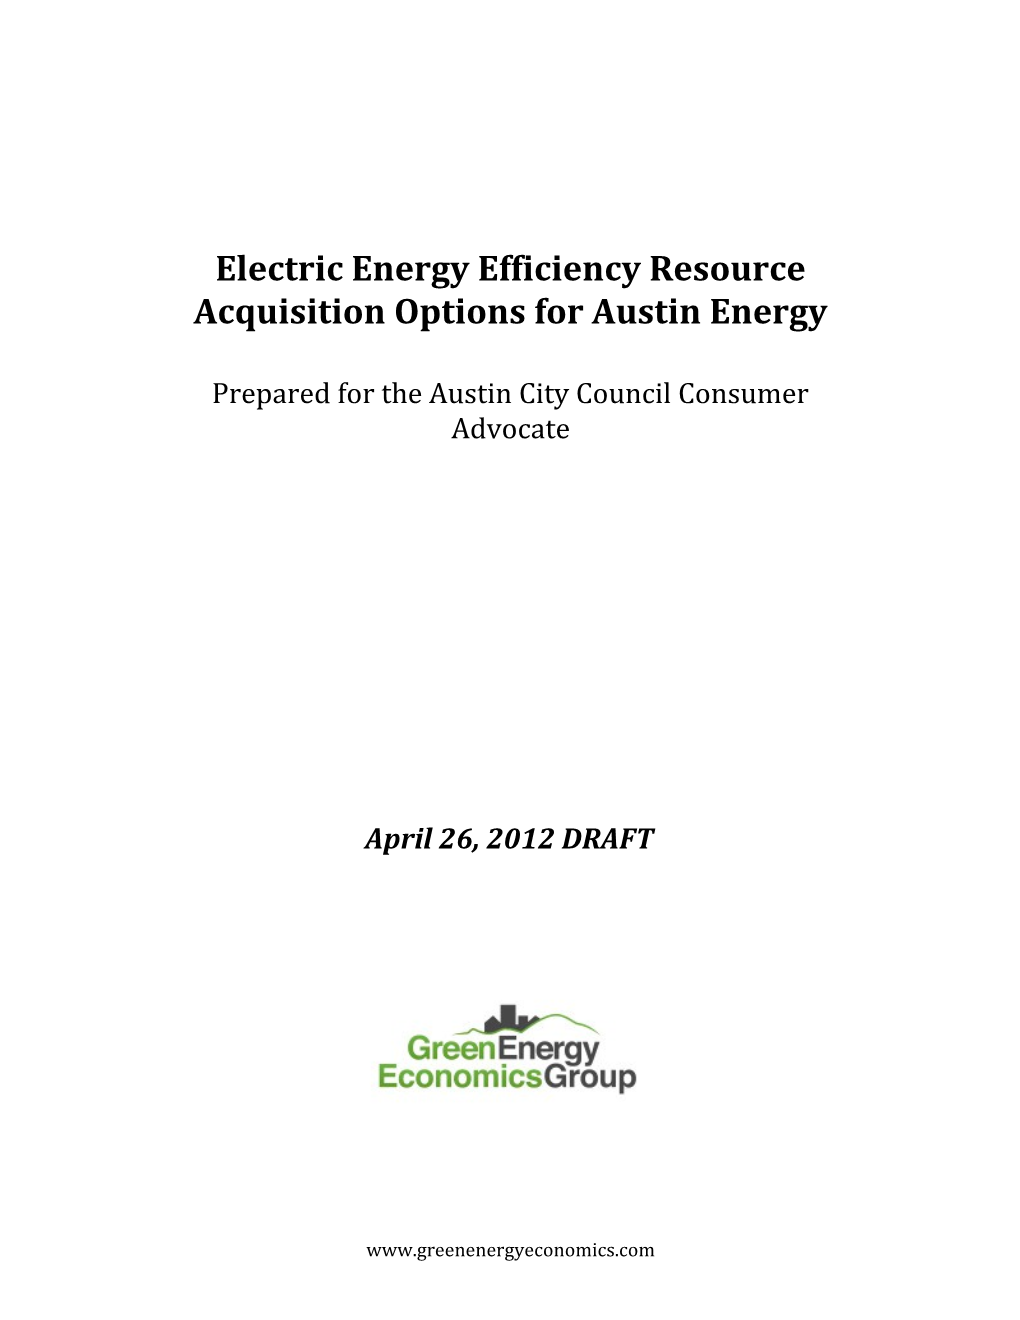 Electric Energy Efficiency Resource Acquisition Options for Austin Energy